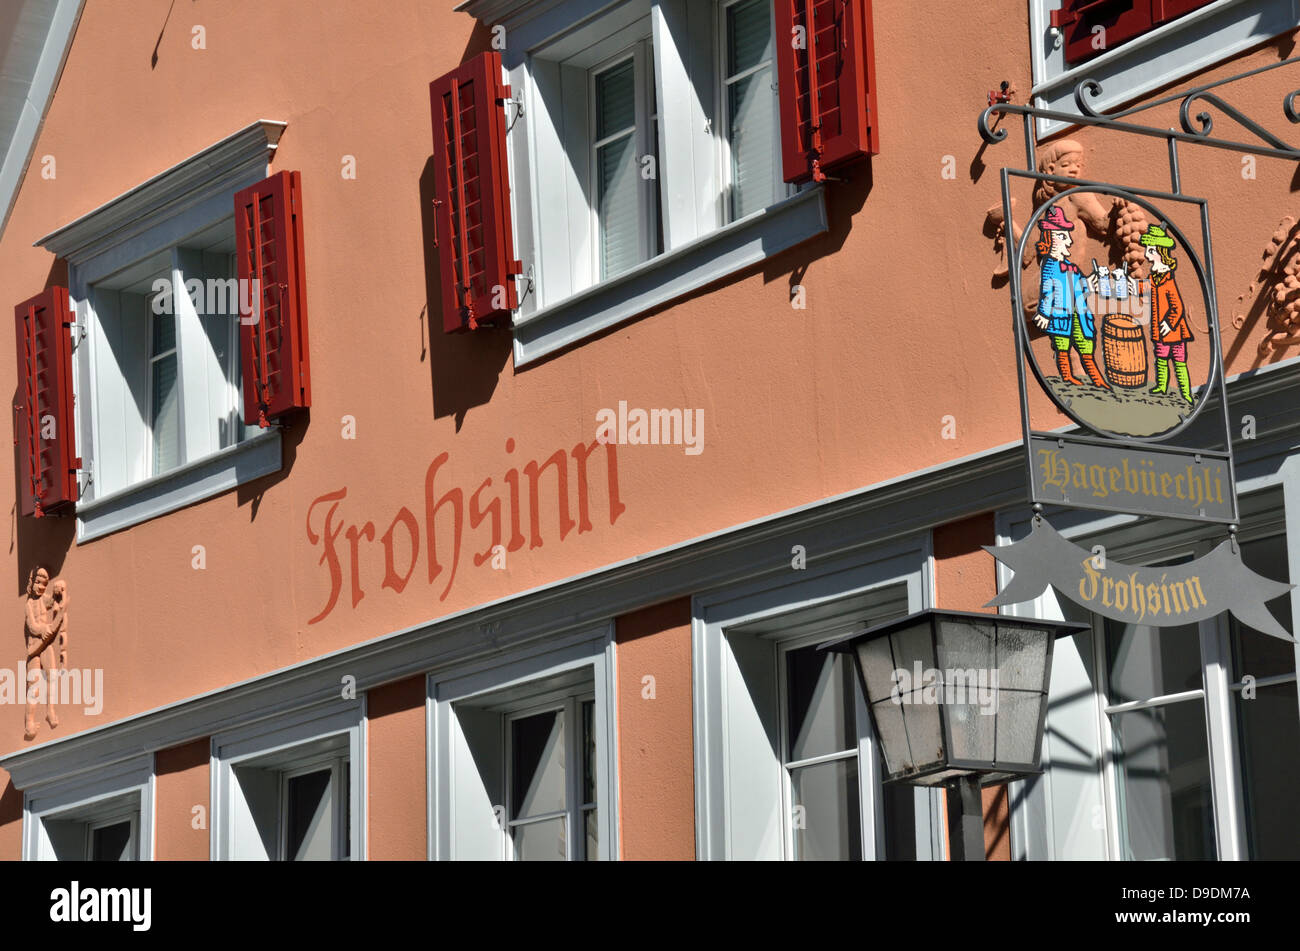 Frohsinn High Resolution Stock Photography and Images - Alamy